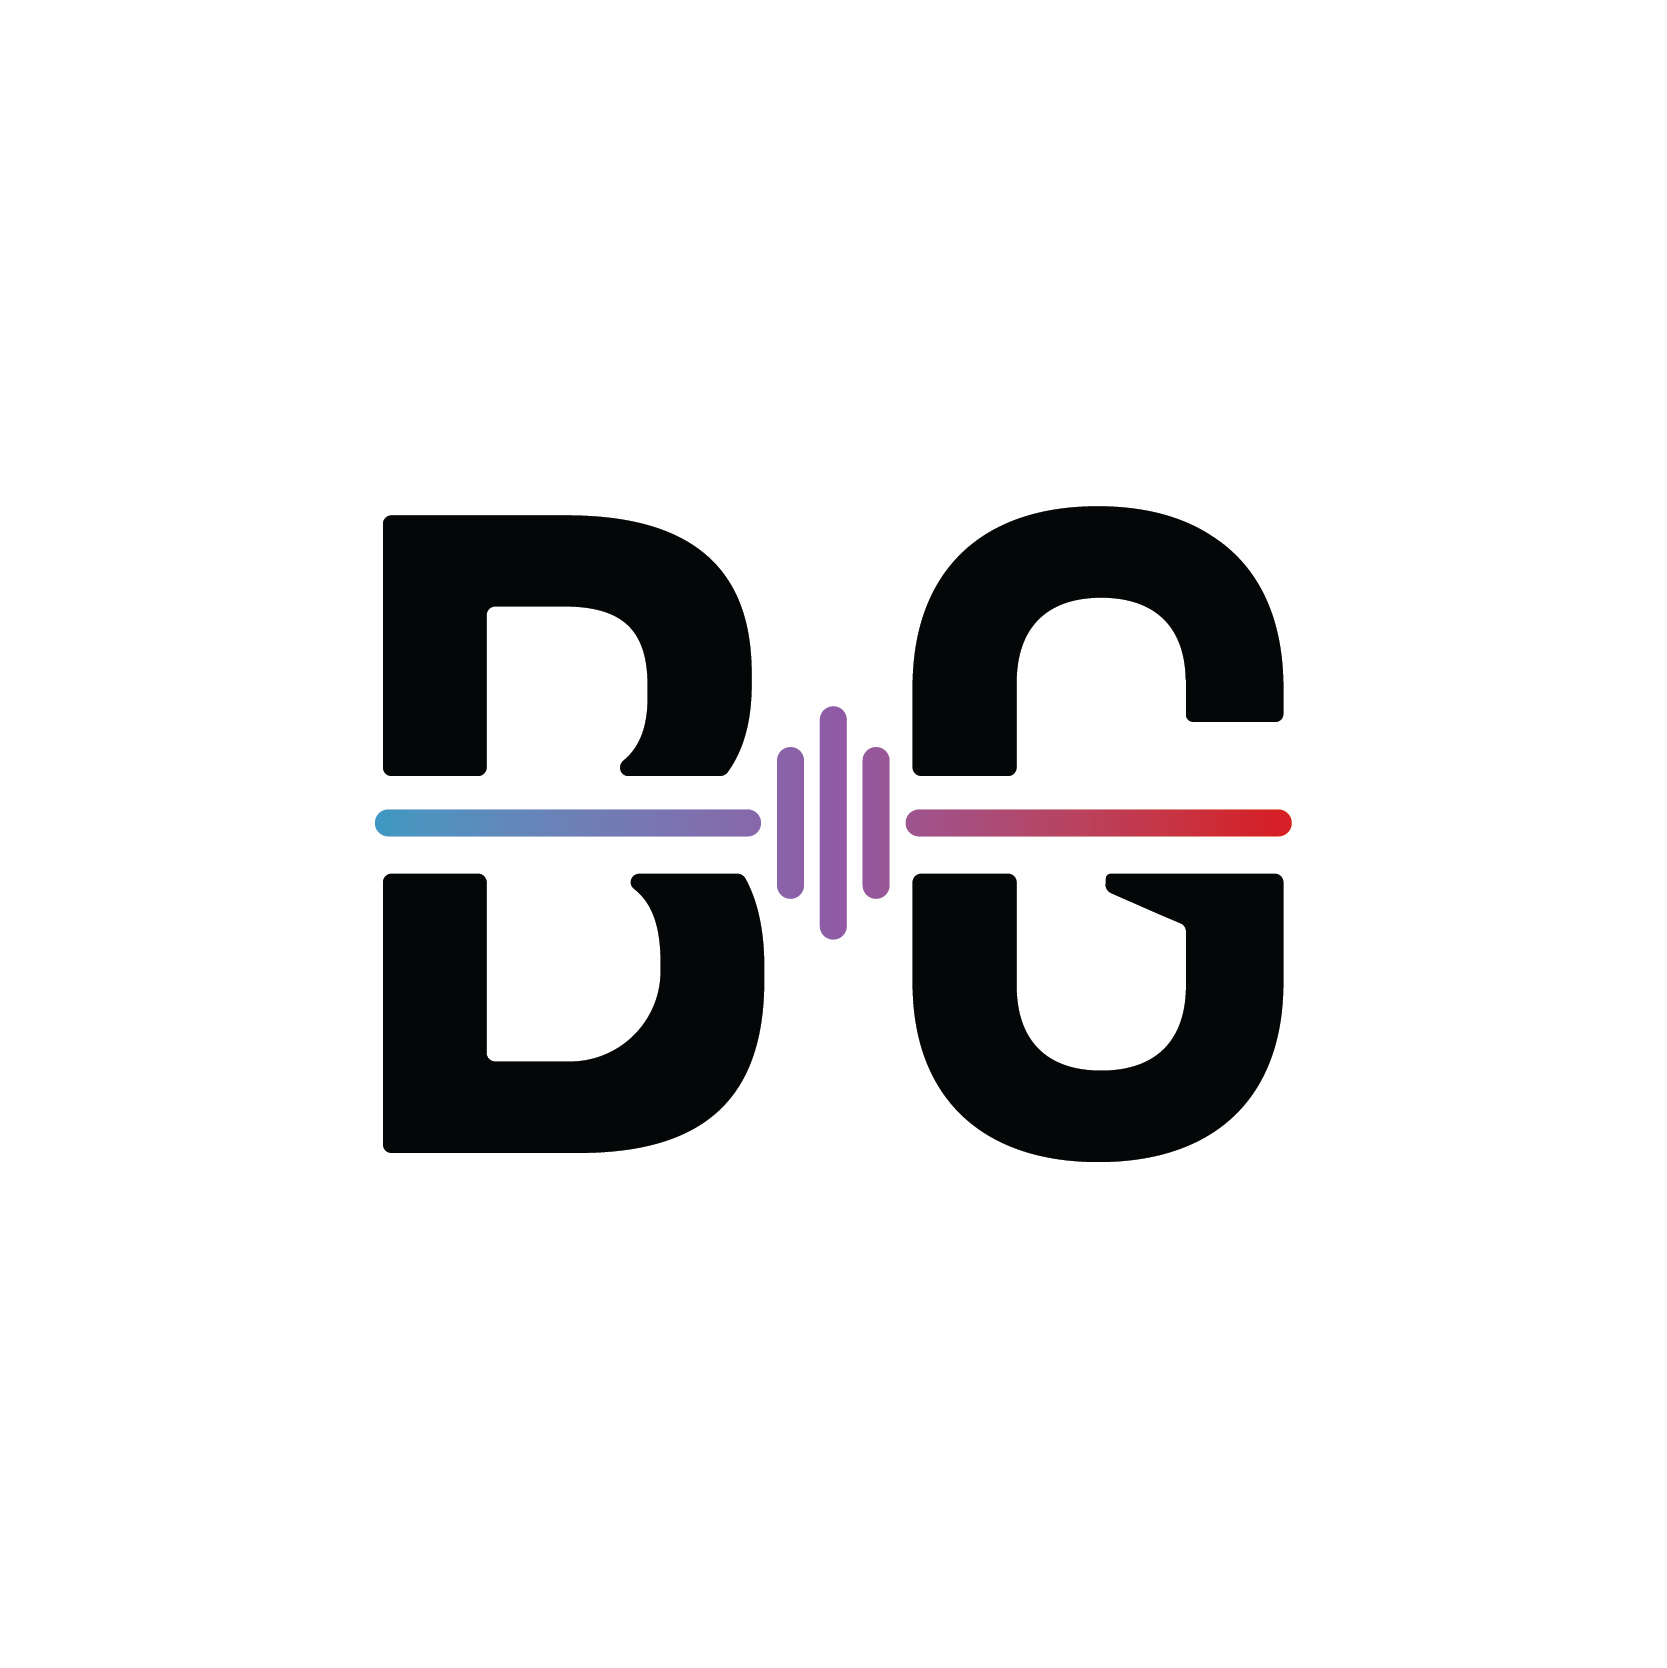 Blaugranagram's newest logo, announced in 2020, as used in a thank you letter / BLAUGRANAGRAM